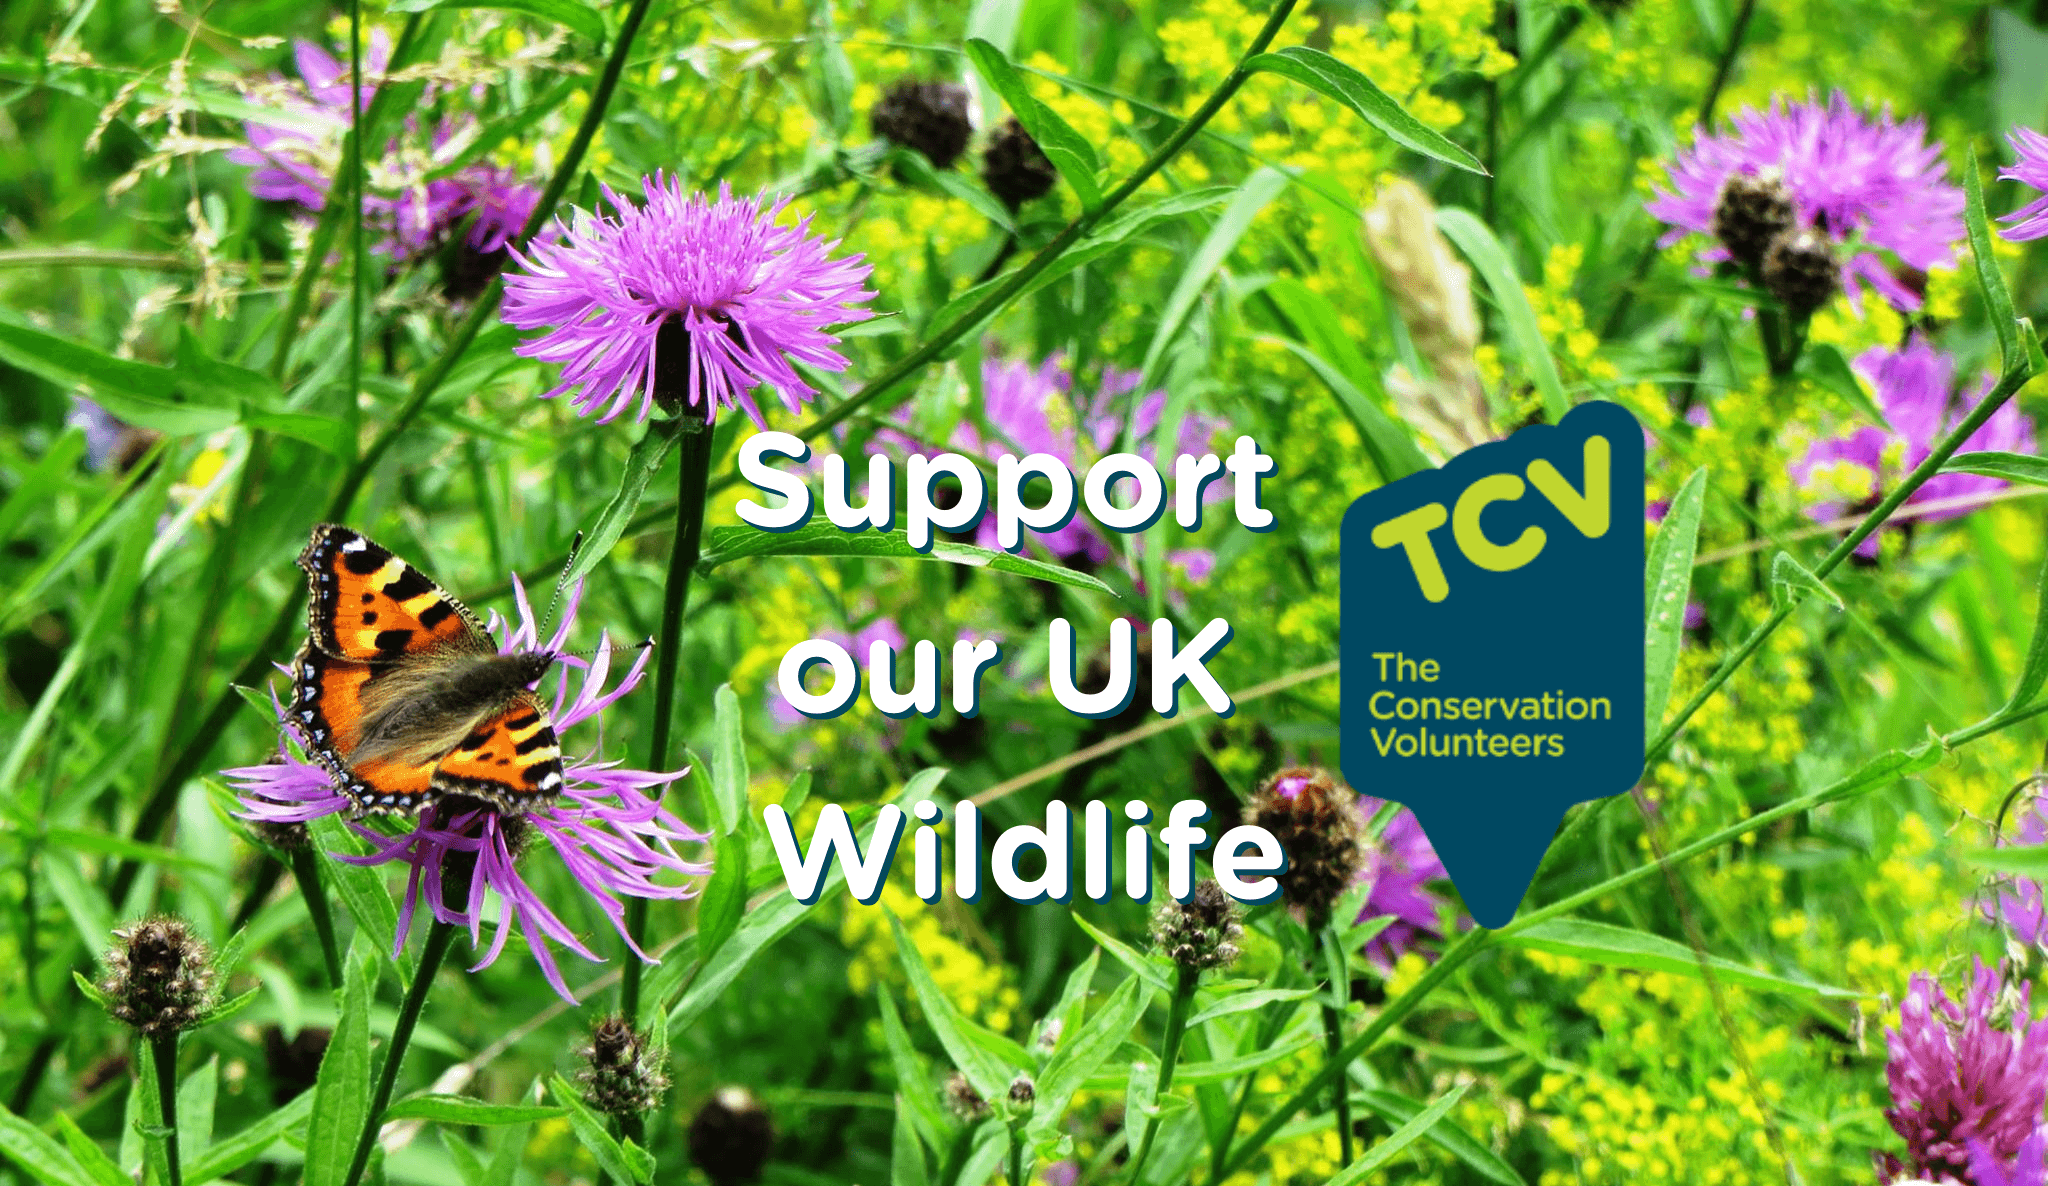 Support our UK Wildlife (1)